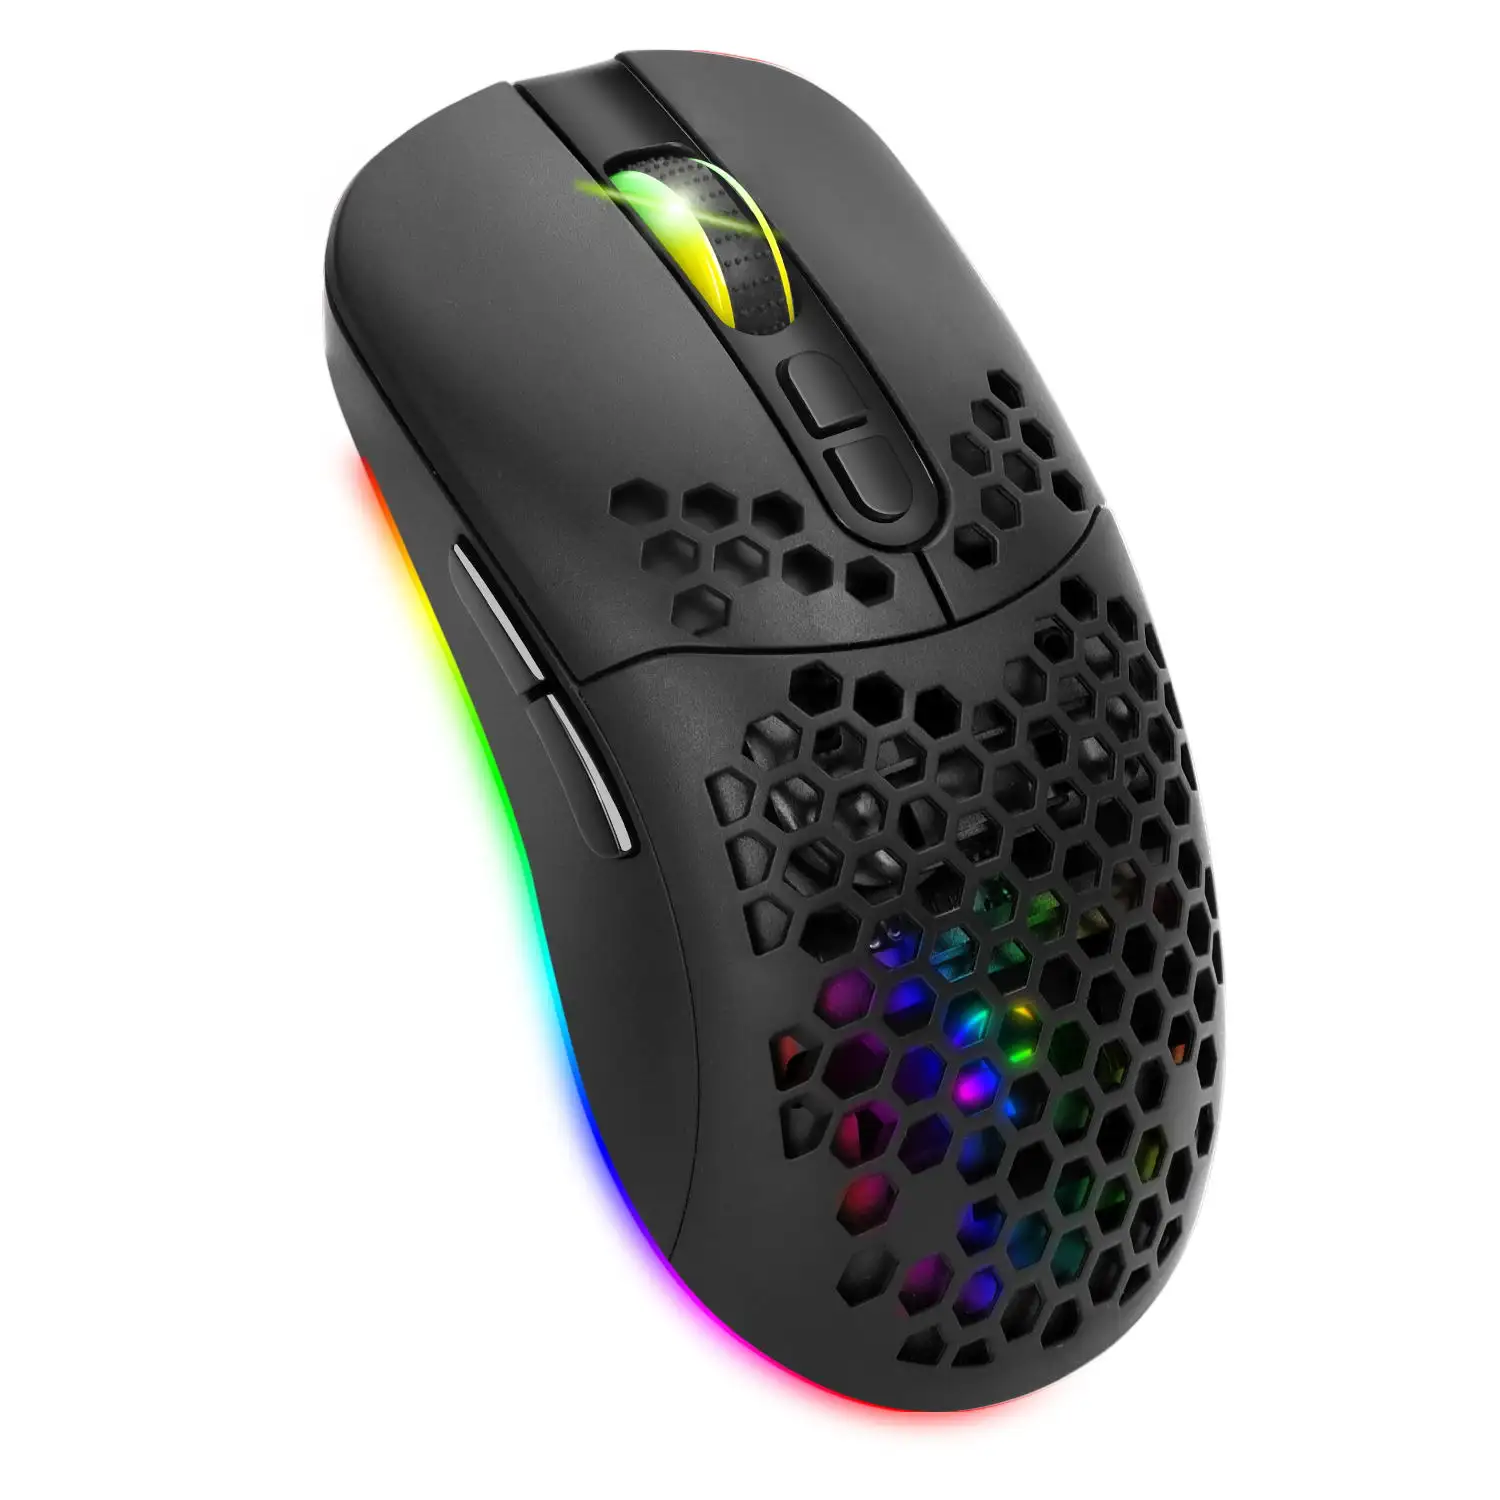 Ergonomic Lightweight RGB Dual Mode Bt 5.0 Wireless Gaming Mouse with 2.4G Receiver